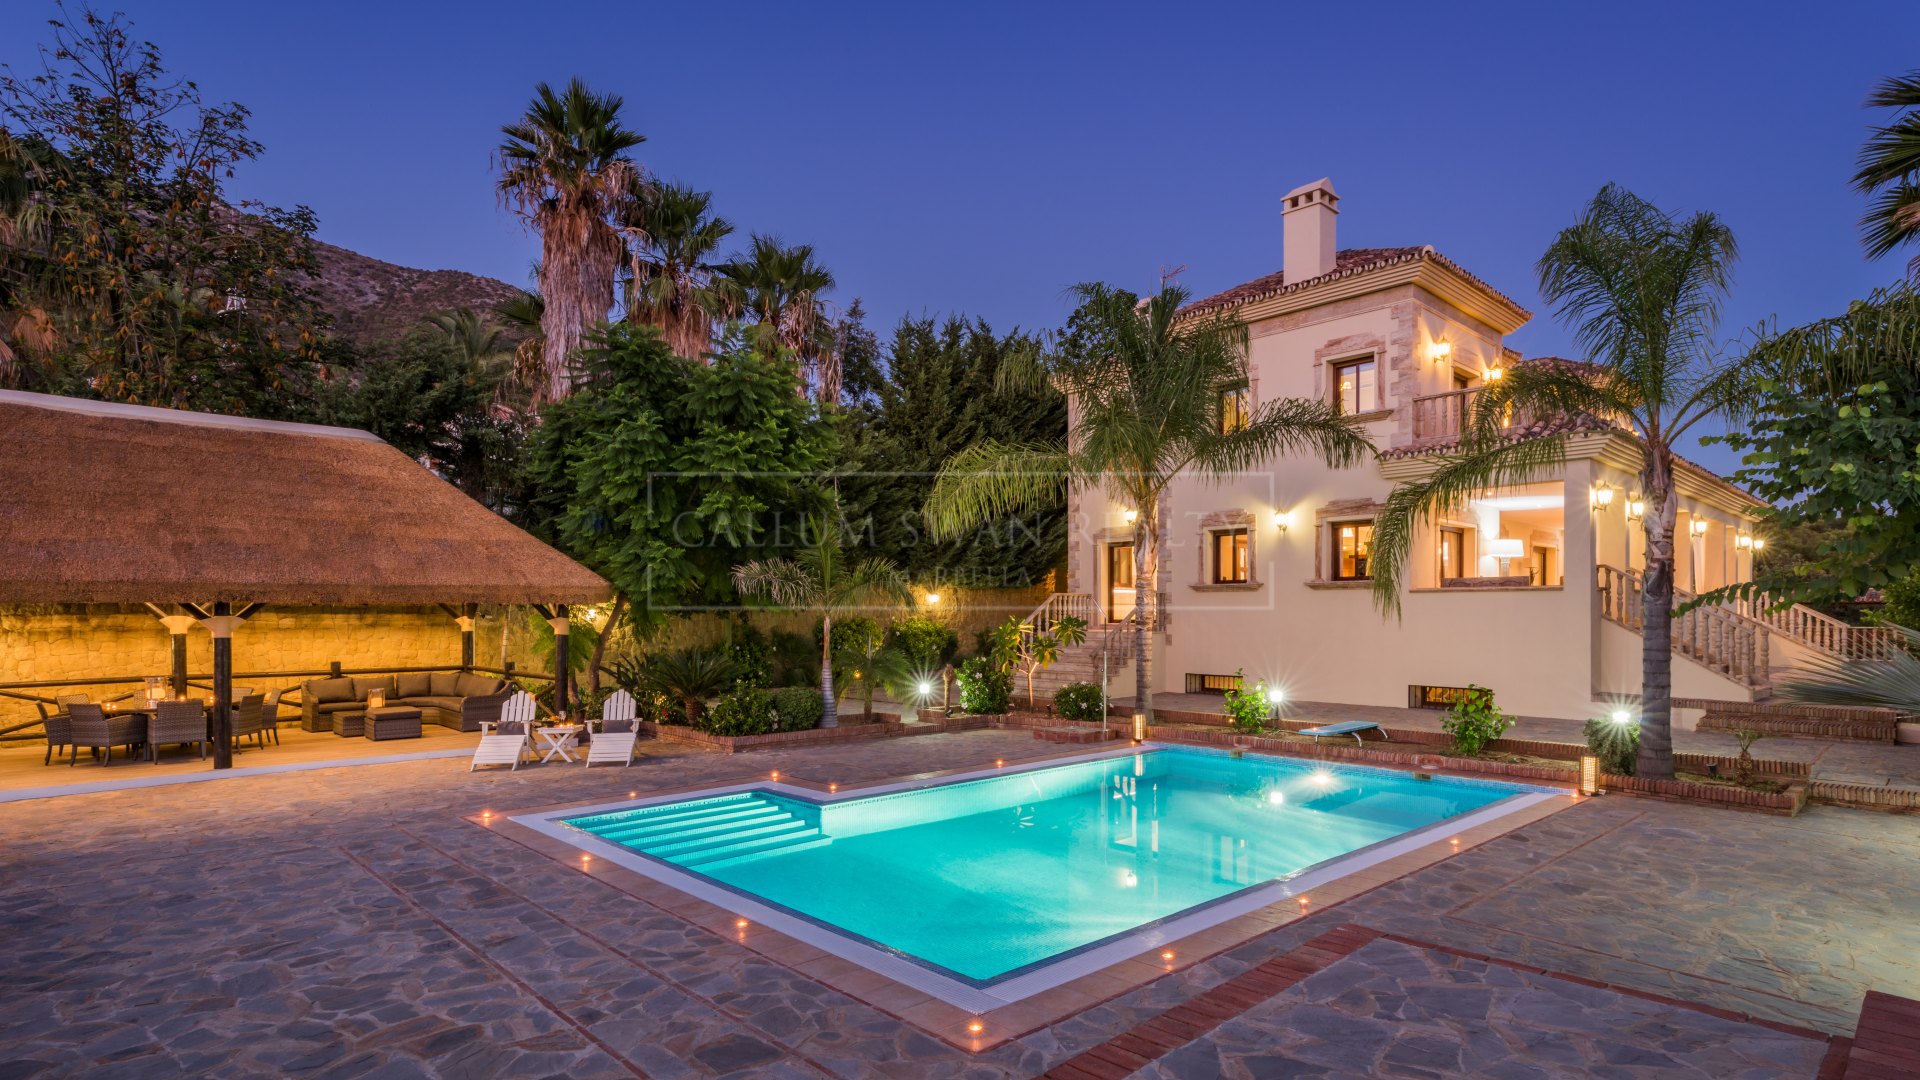 Luxury family home in a gated community in the foothills above Marbella